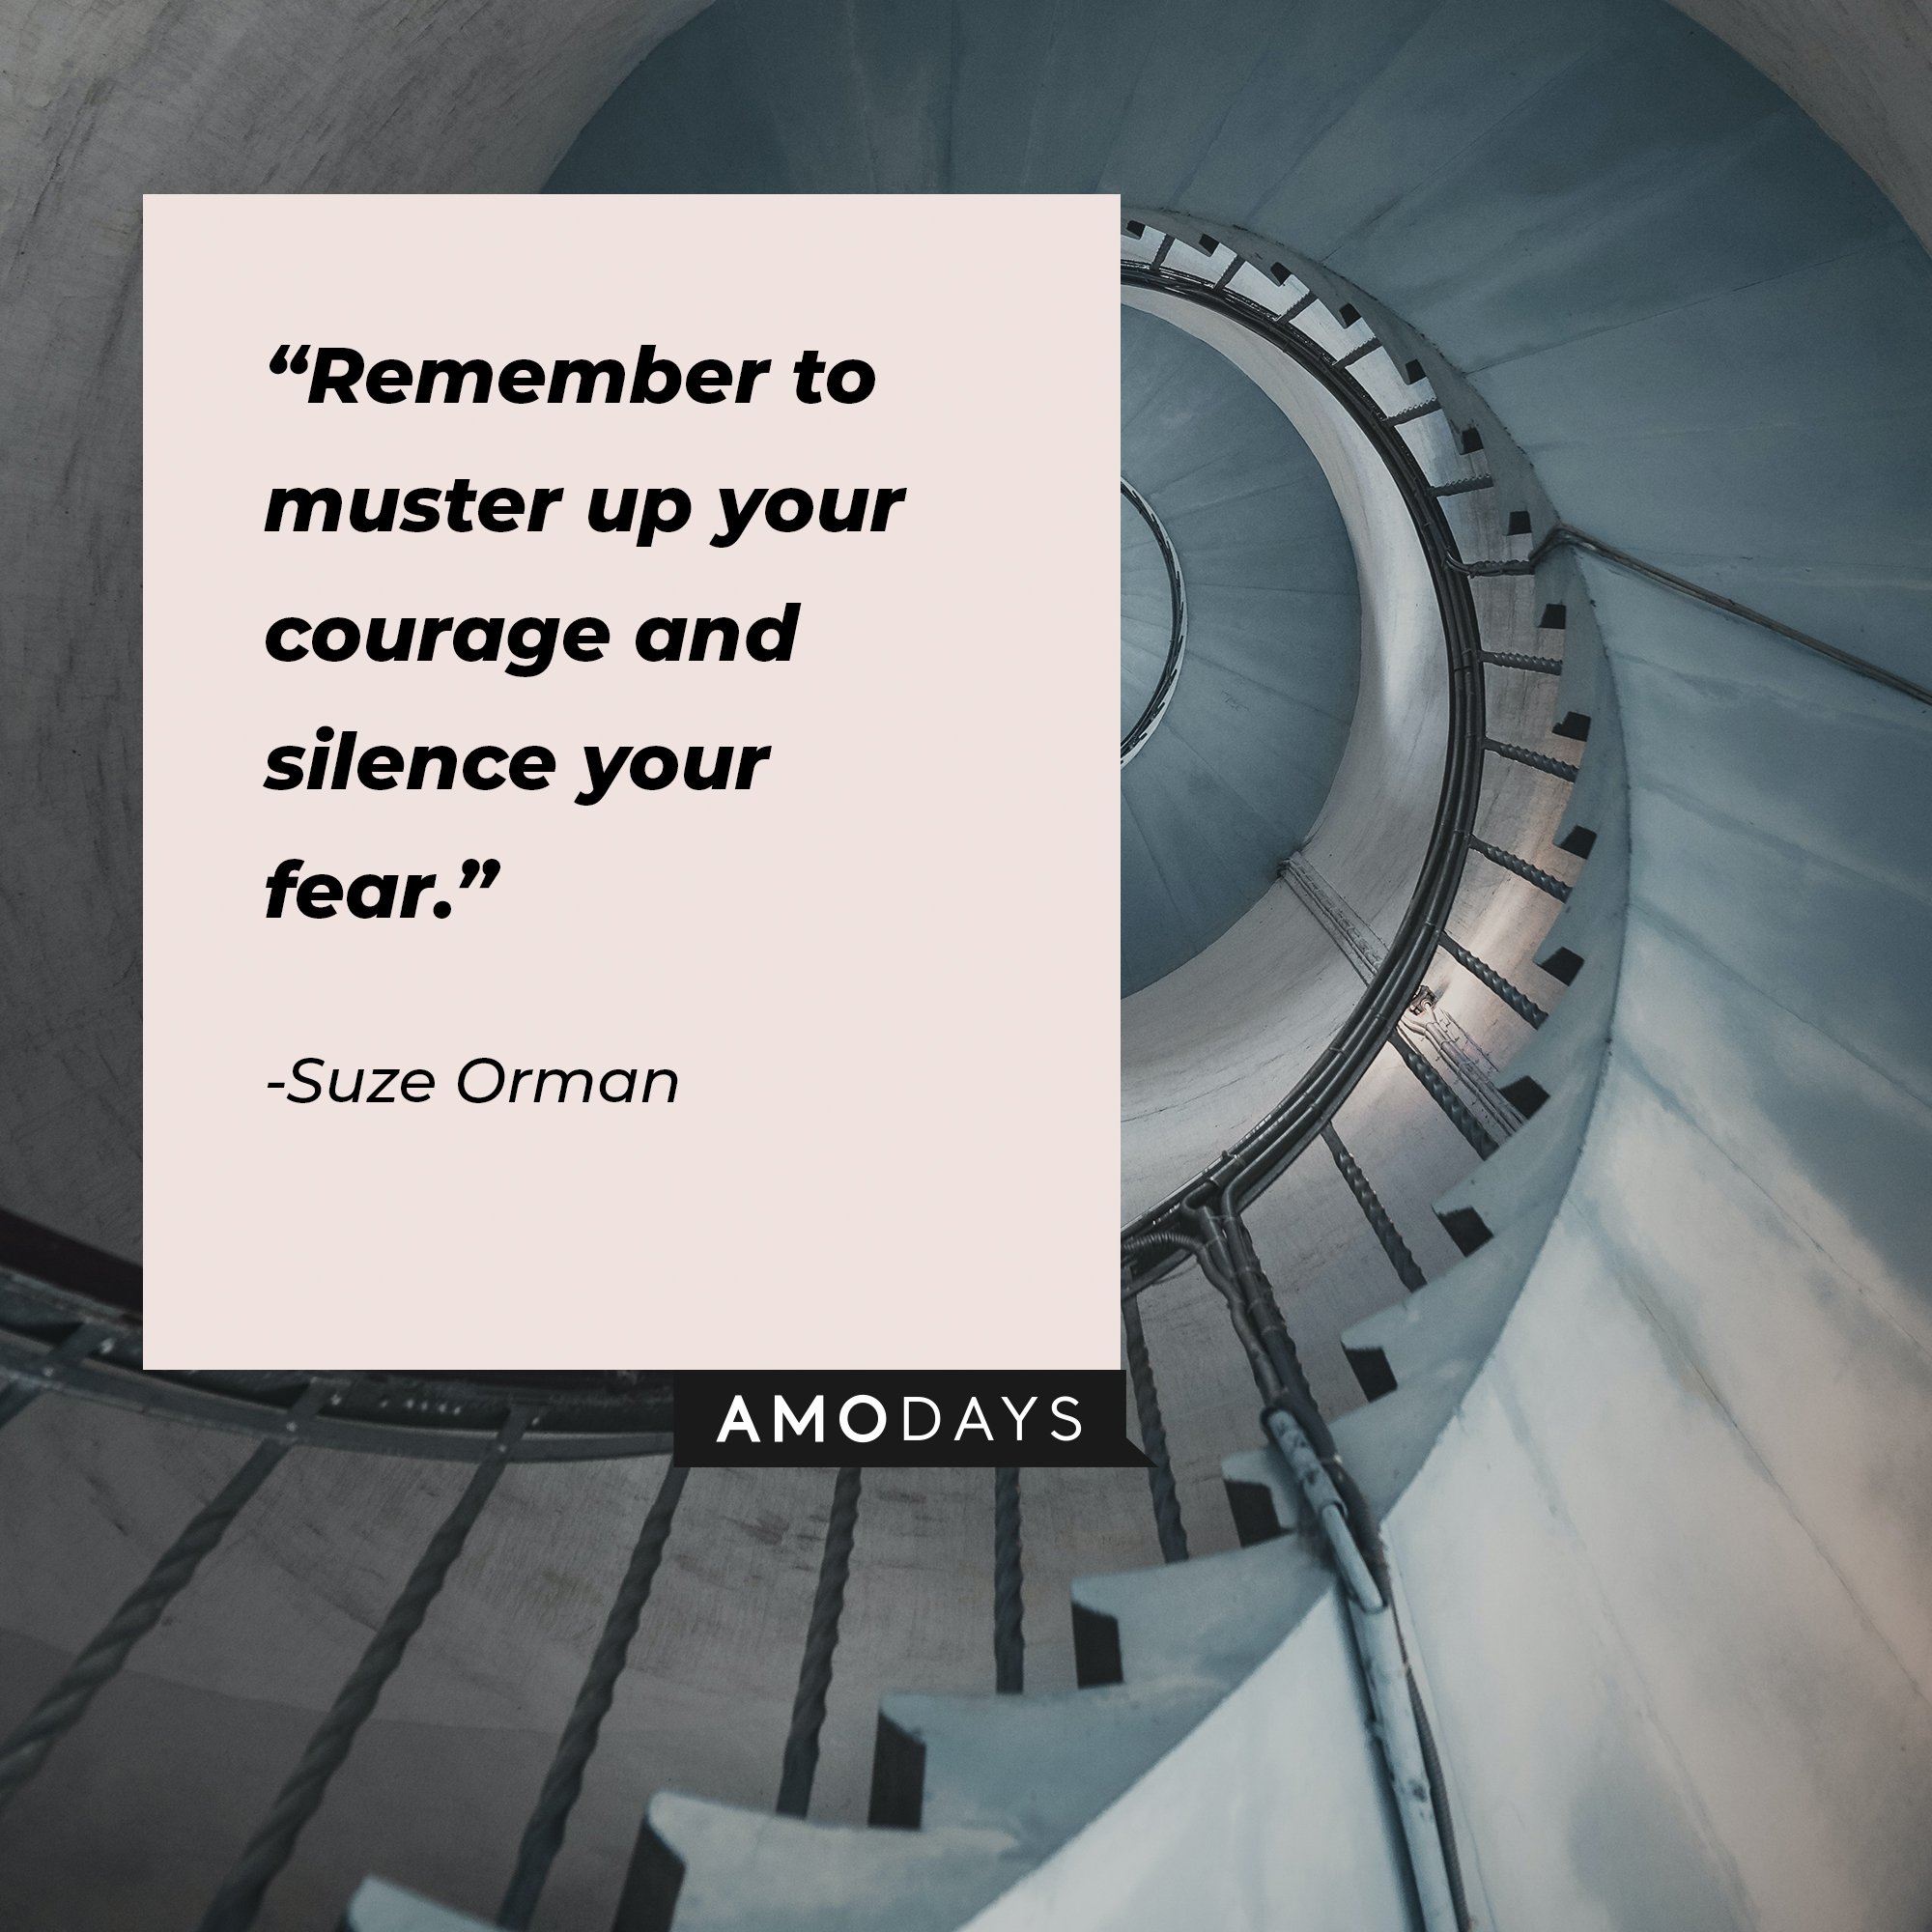 Suze Orman's quote: “Remember to muster up your courage and silence your fear.”  | Image: AmoDays